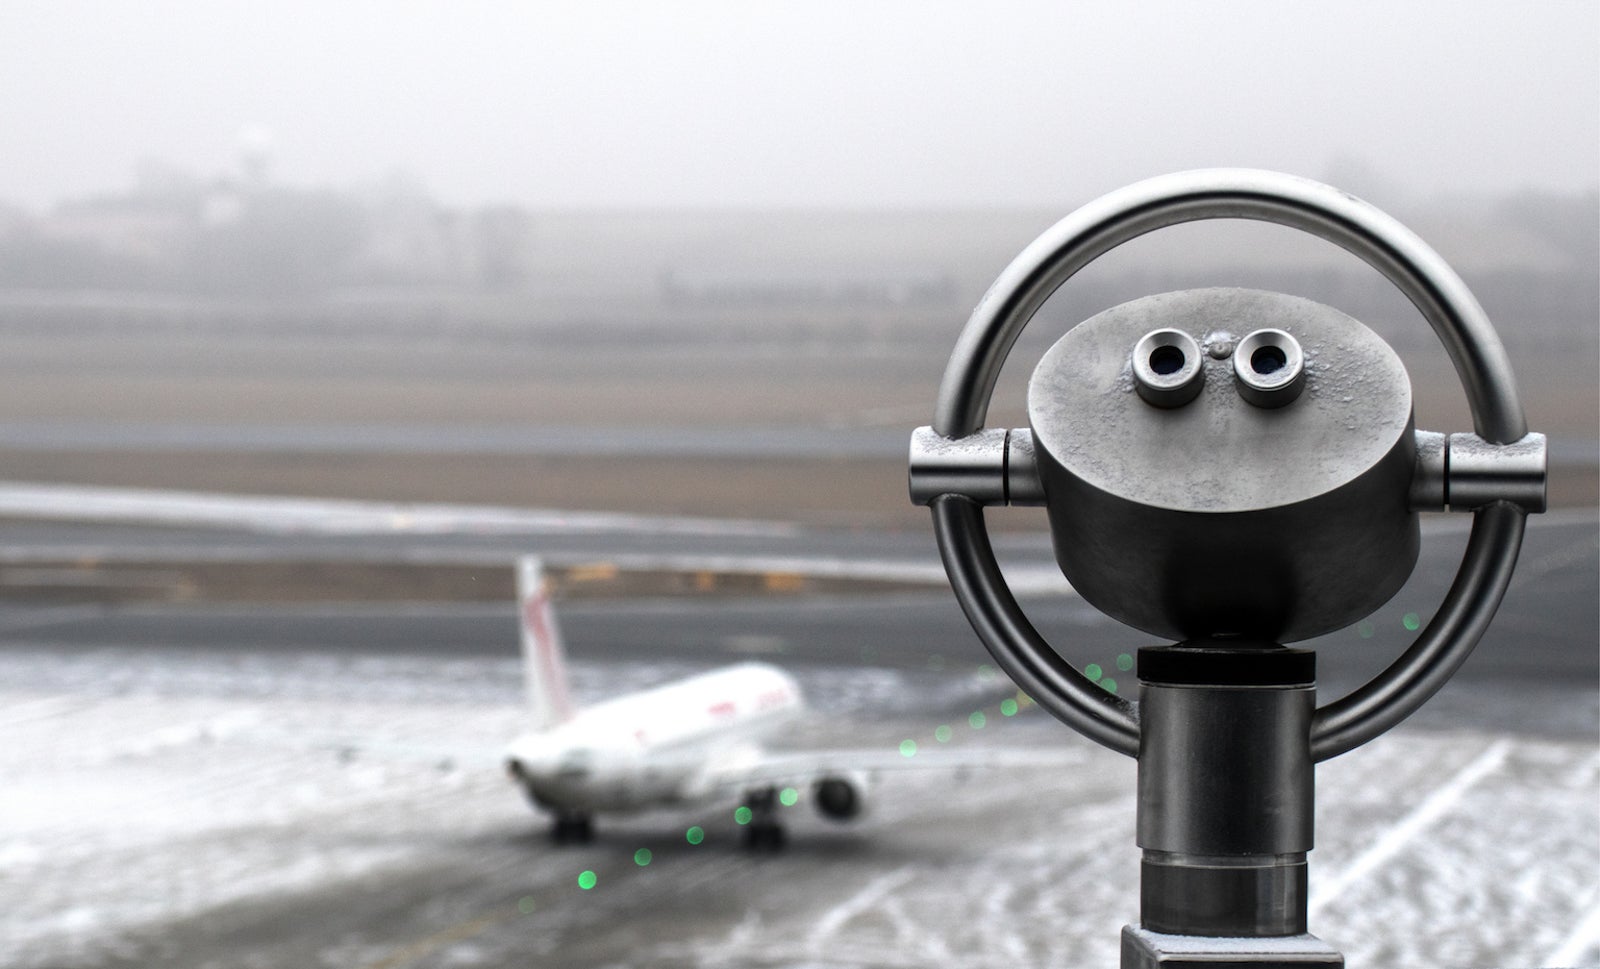 Close-Up Of Coin-Operated Binoculars Against Airport Runway